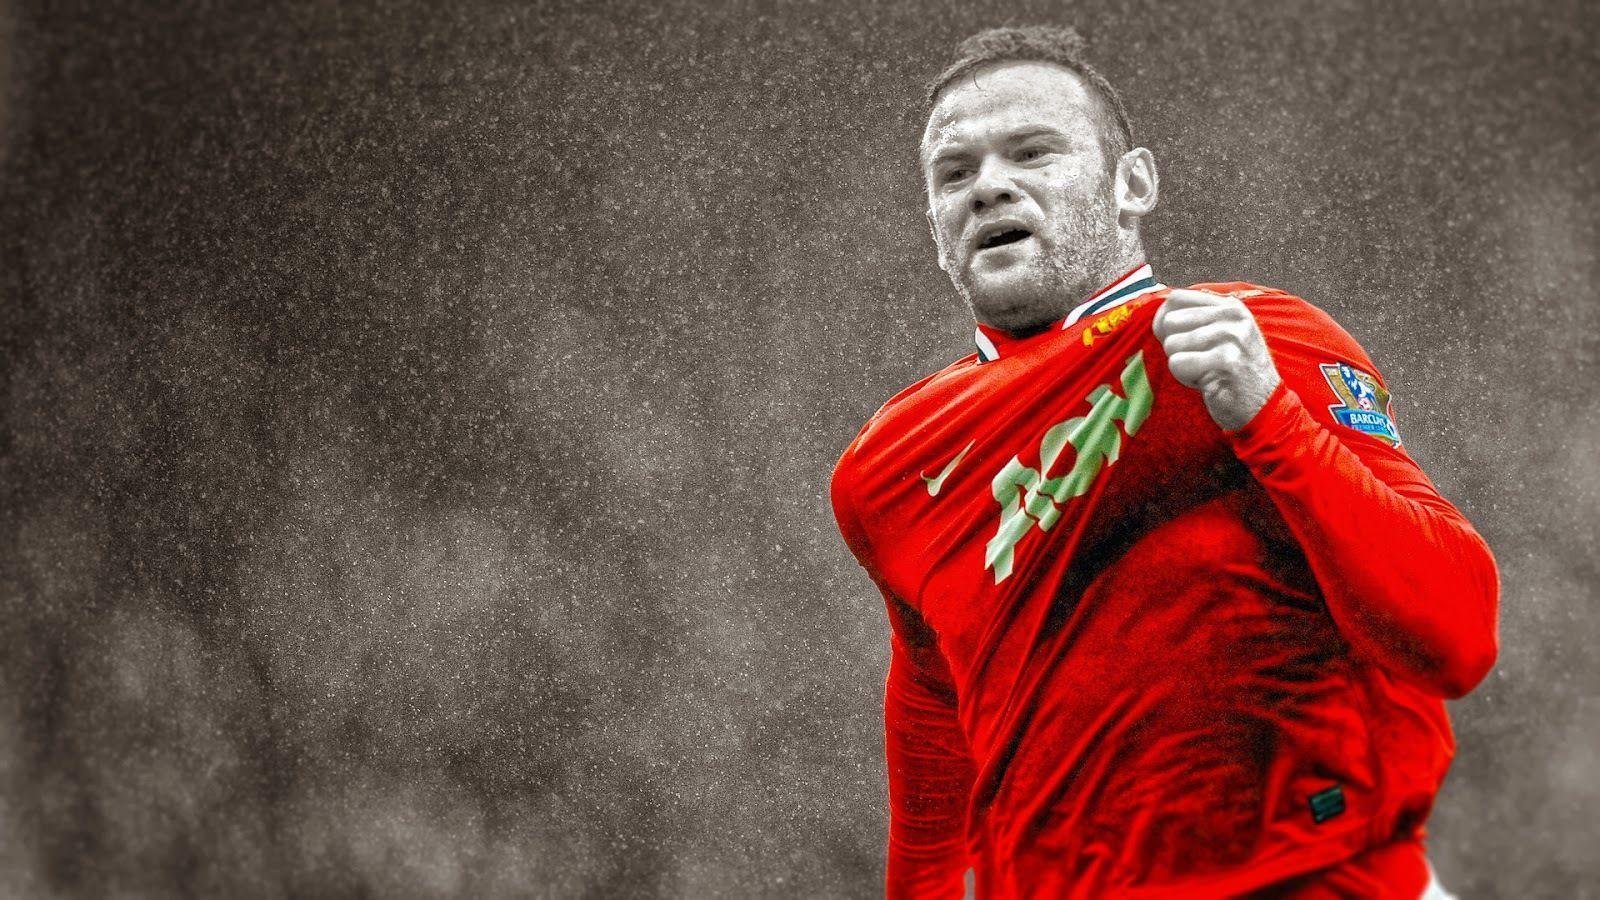 The best football player of Manchester United Wayne Rooney